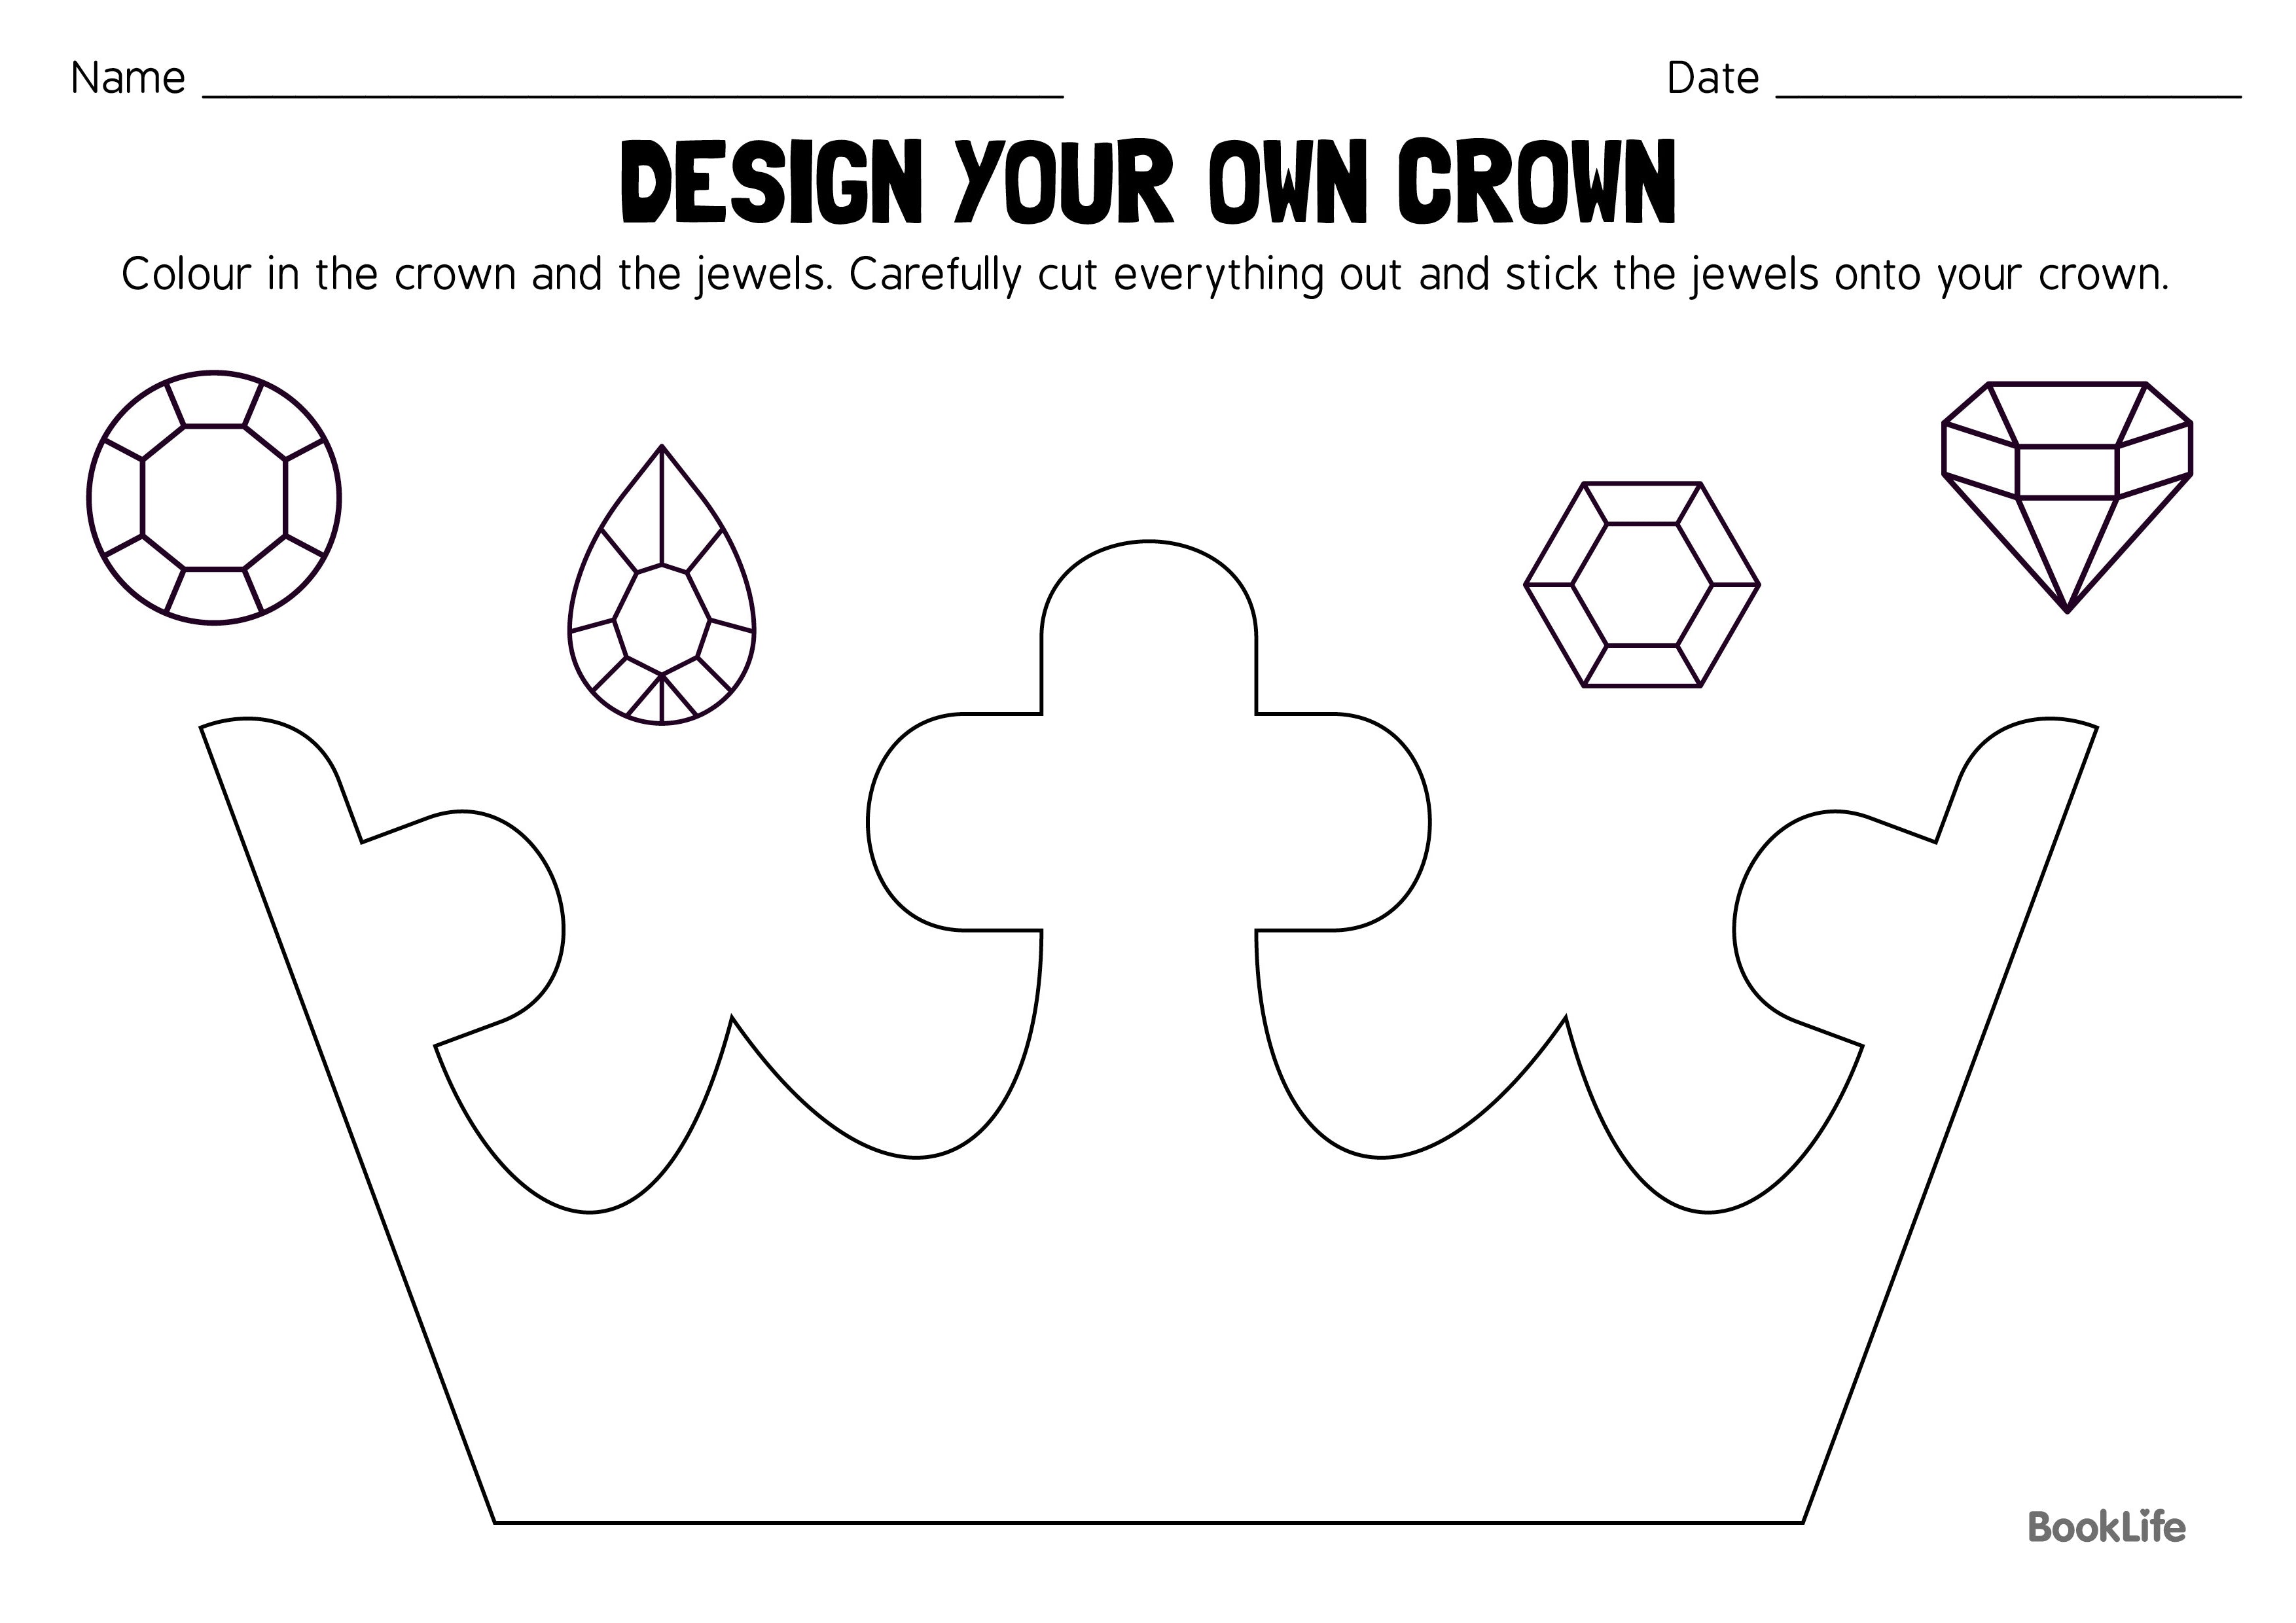 Design Your Own Crown